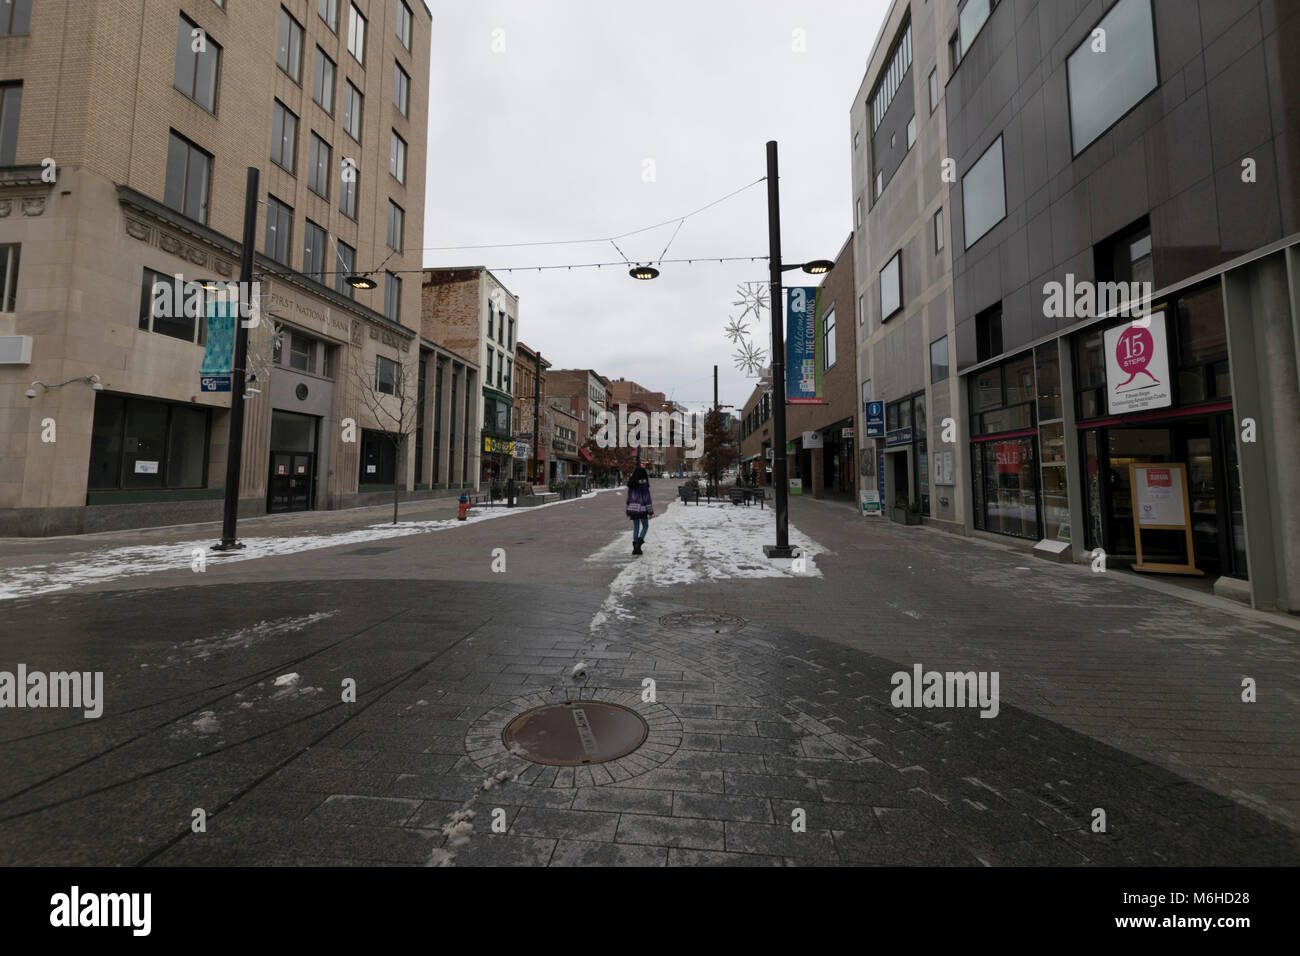 Downtown Ithaca commons area, Ithaca NY Stock Photo